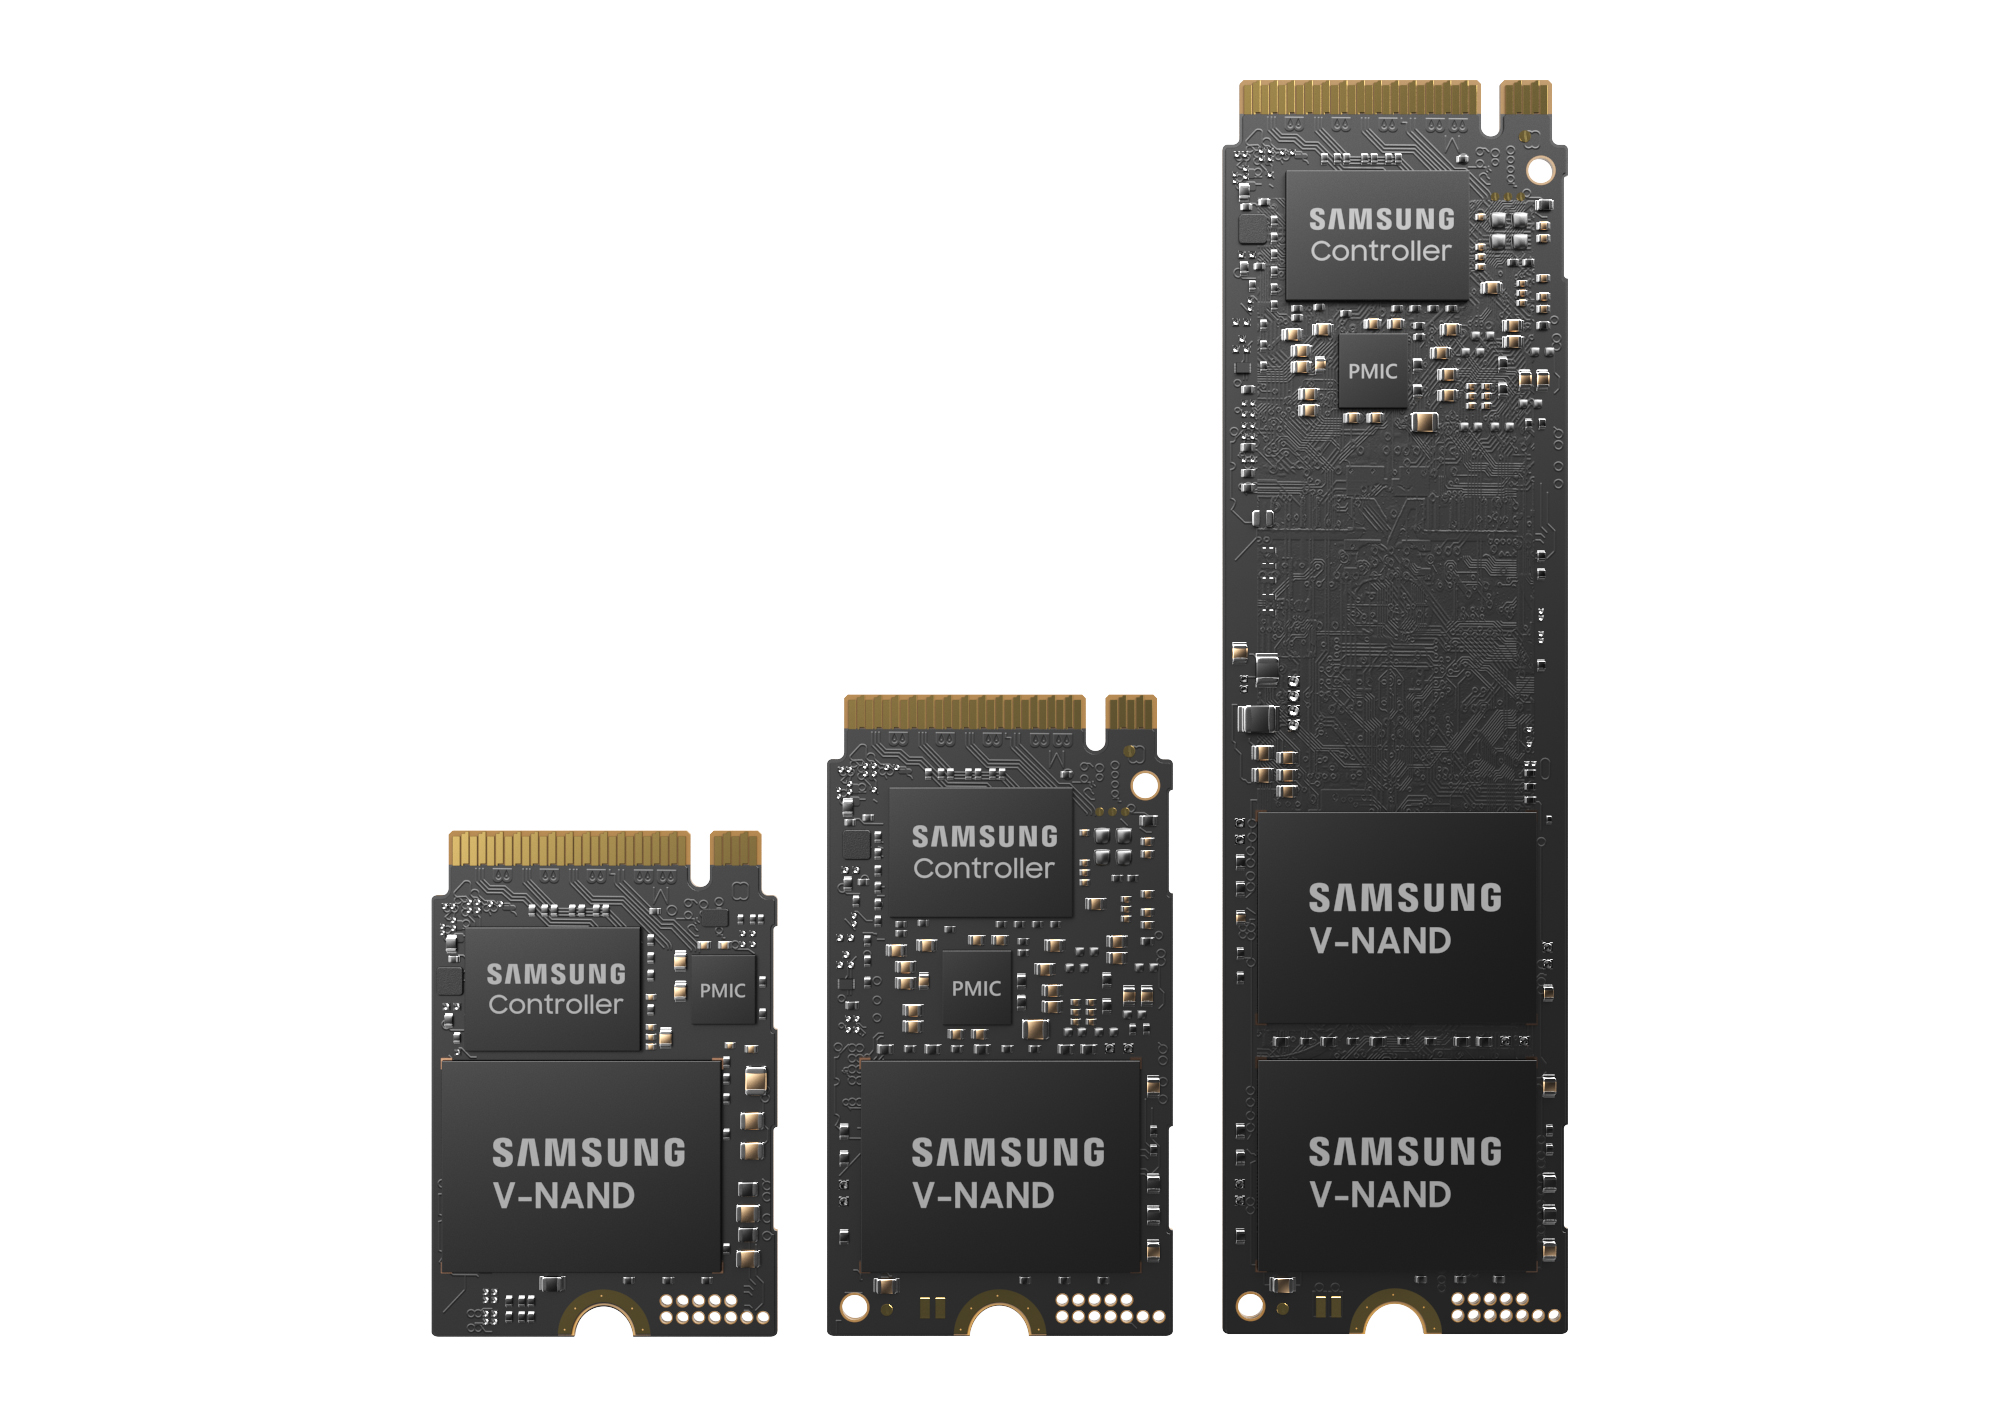 Samsung intros new SSD with higher efficiency, performance, security